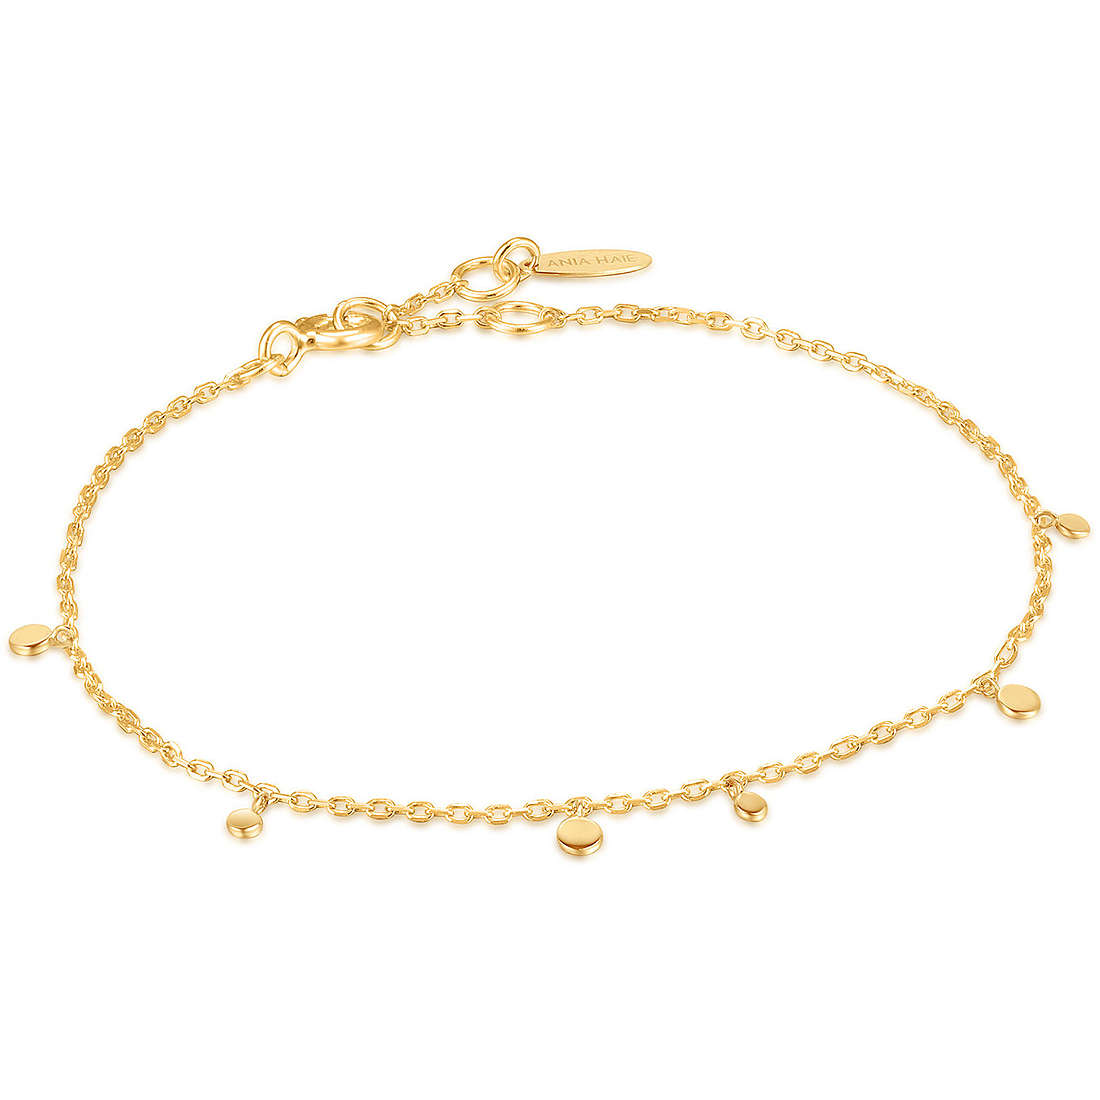 Ania Haie Gold Collection bracelet woman Bracelet with 14kt Gold Chain jewel BAU001-05YG